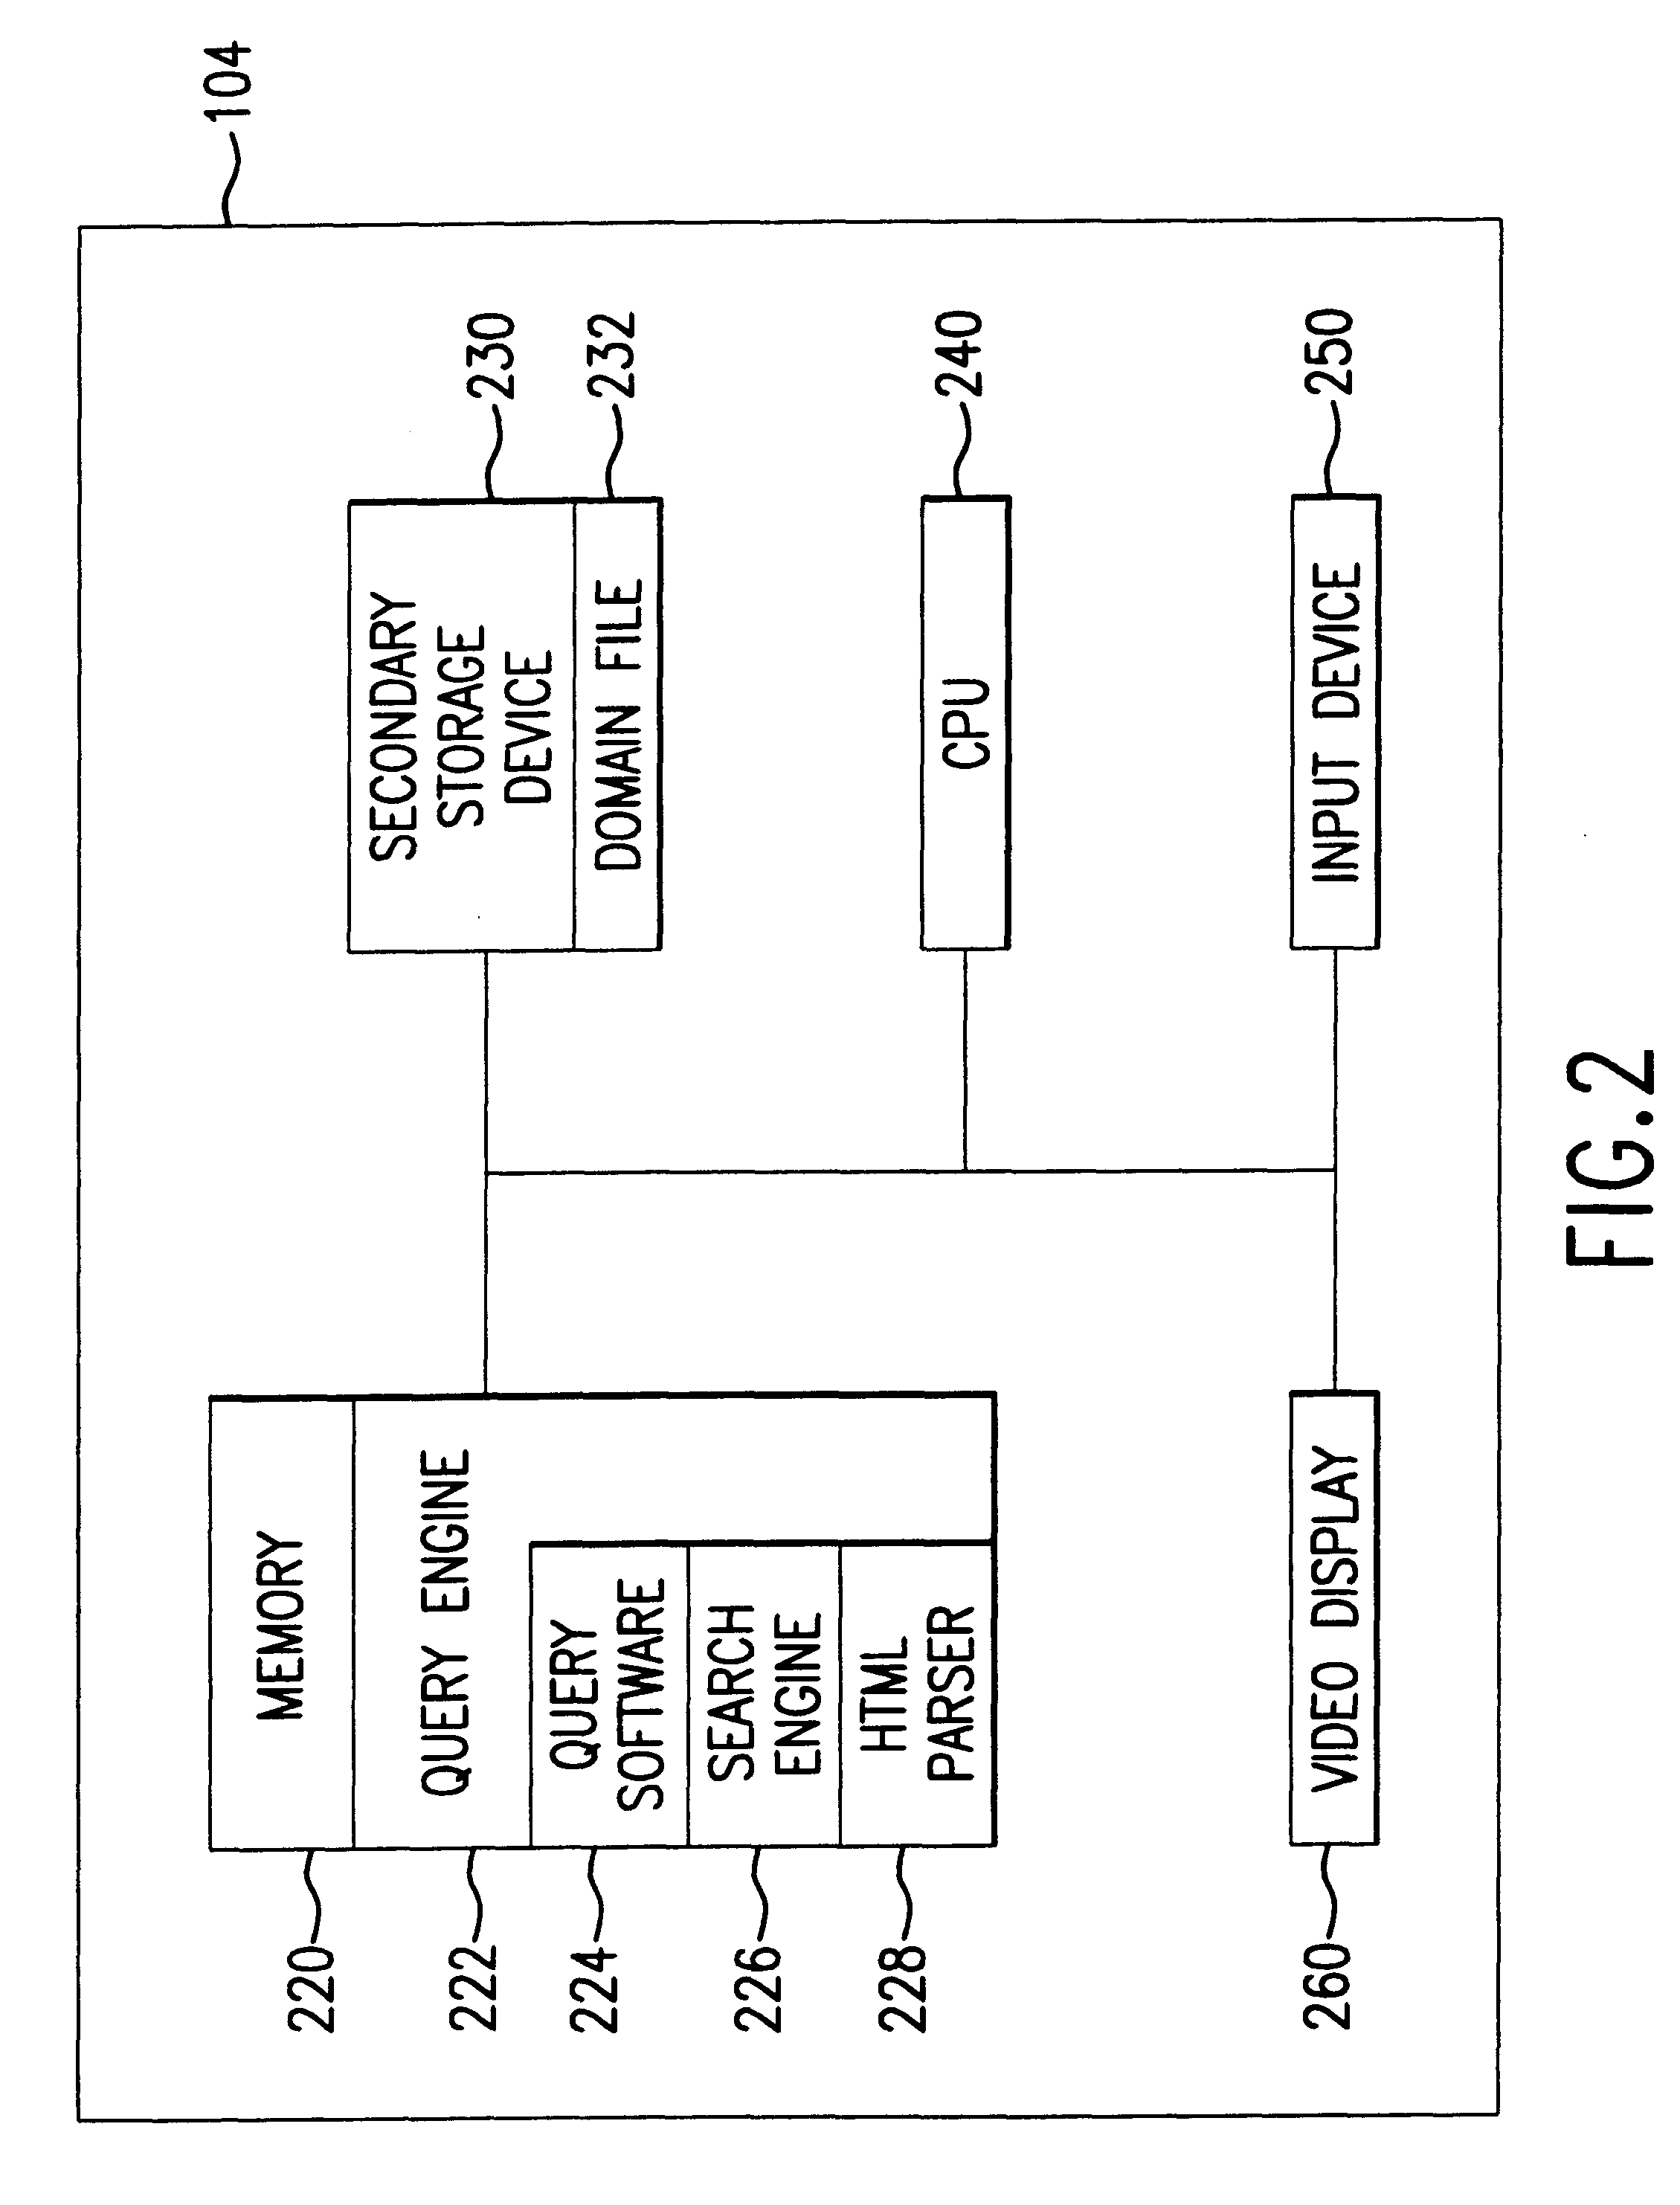 Method of determining unavailability of an internet domain name